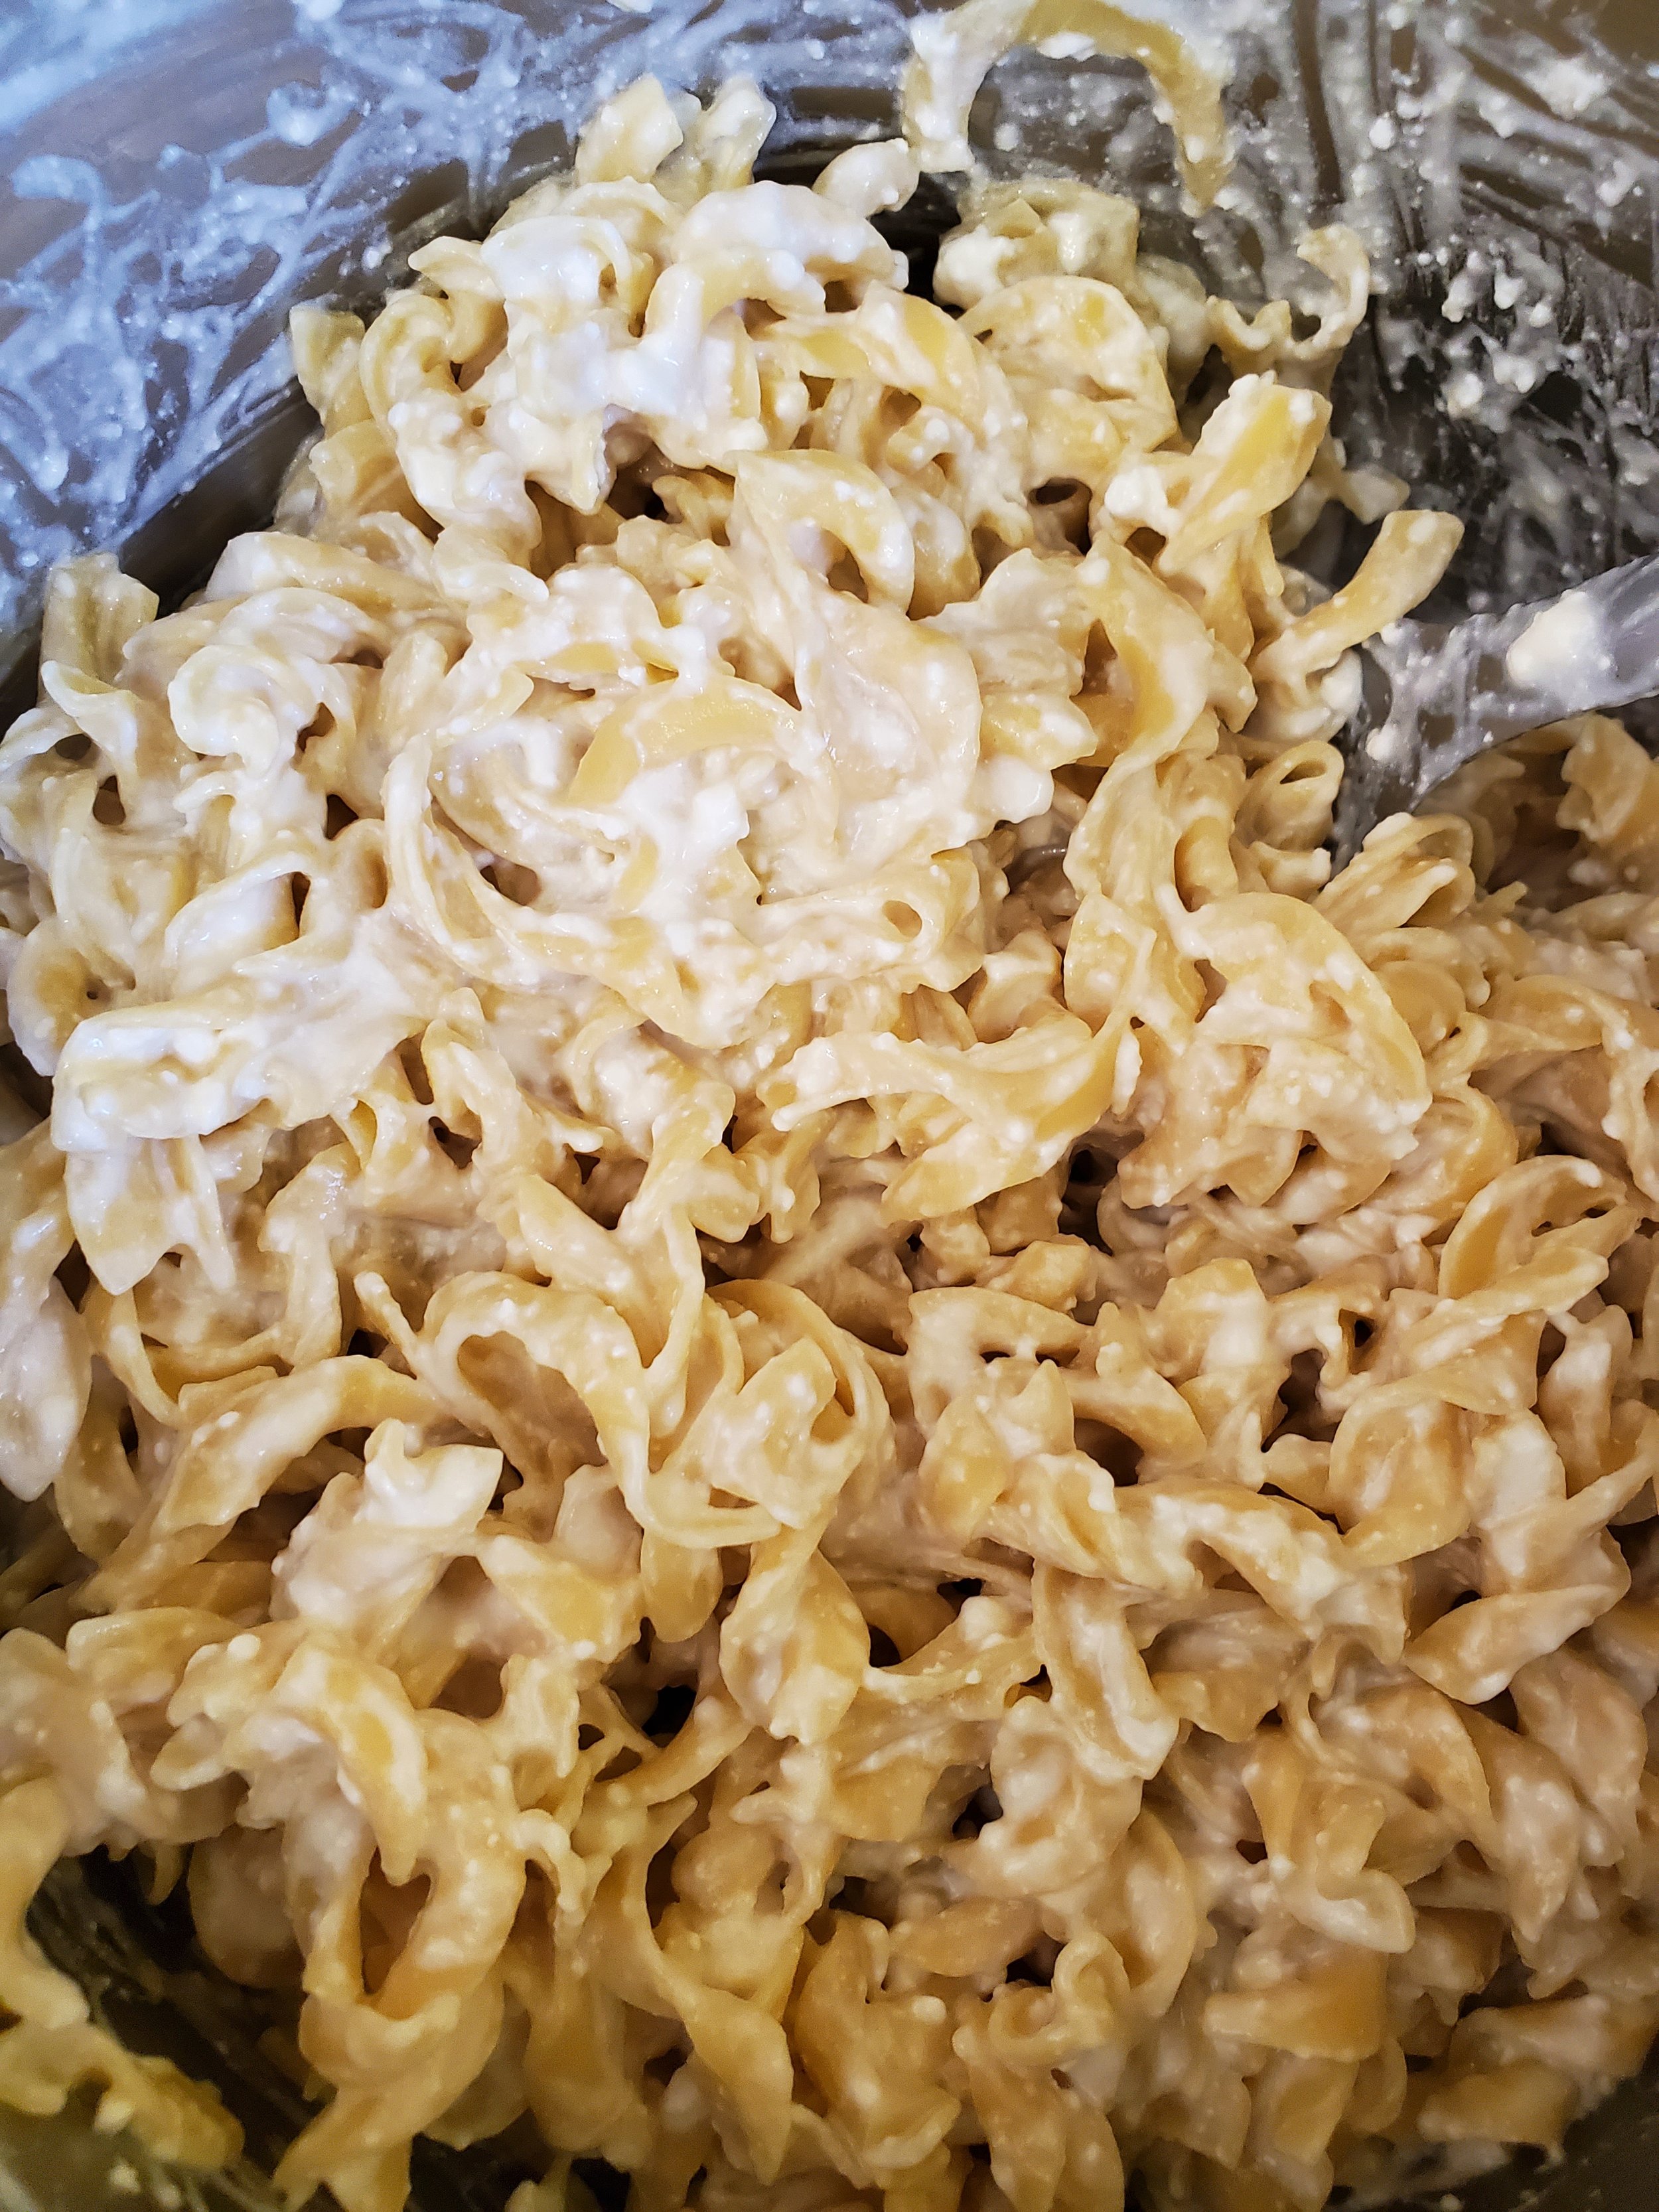 We're almost ready to serve the Polish Style Mac and Cheese